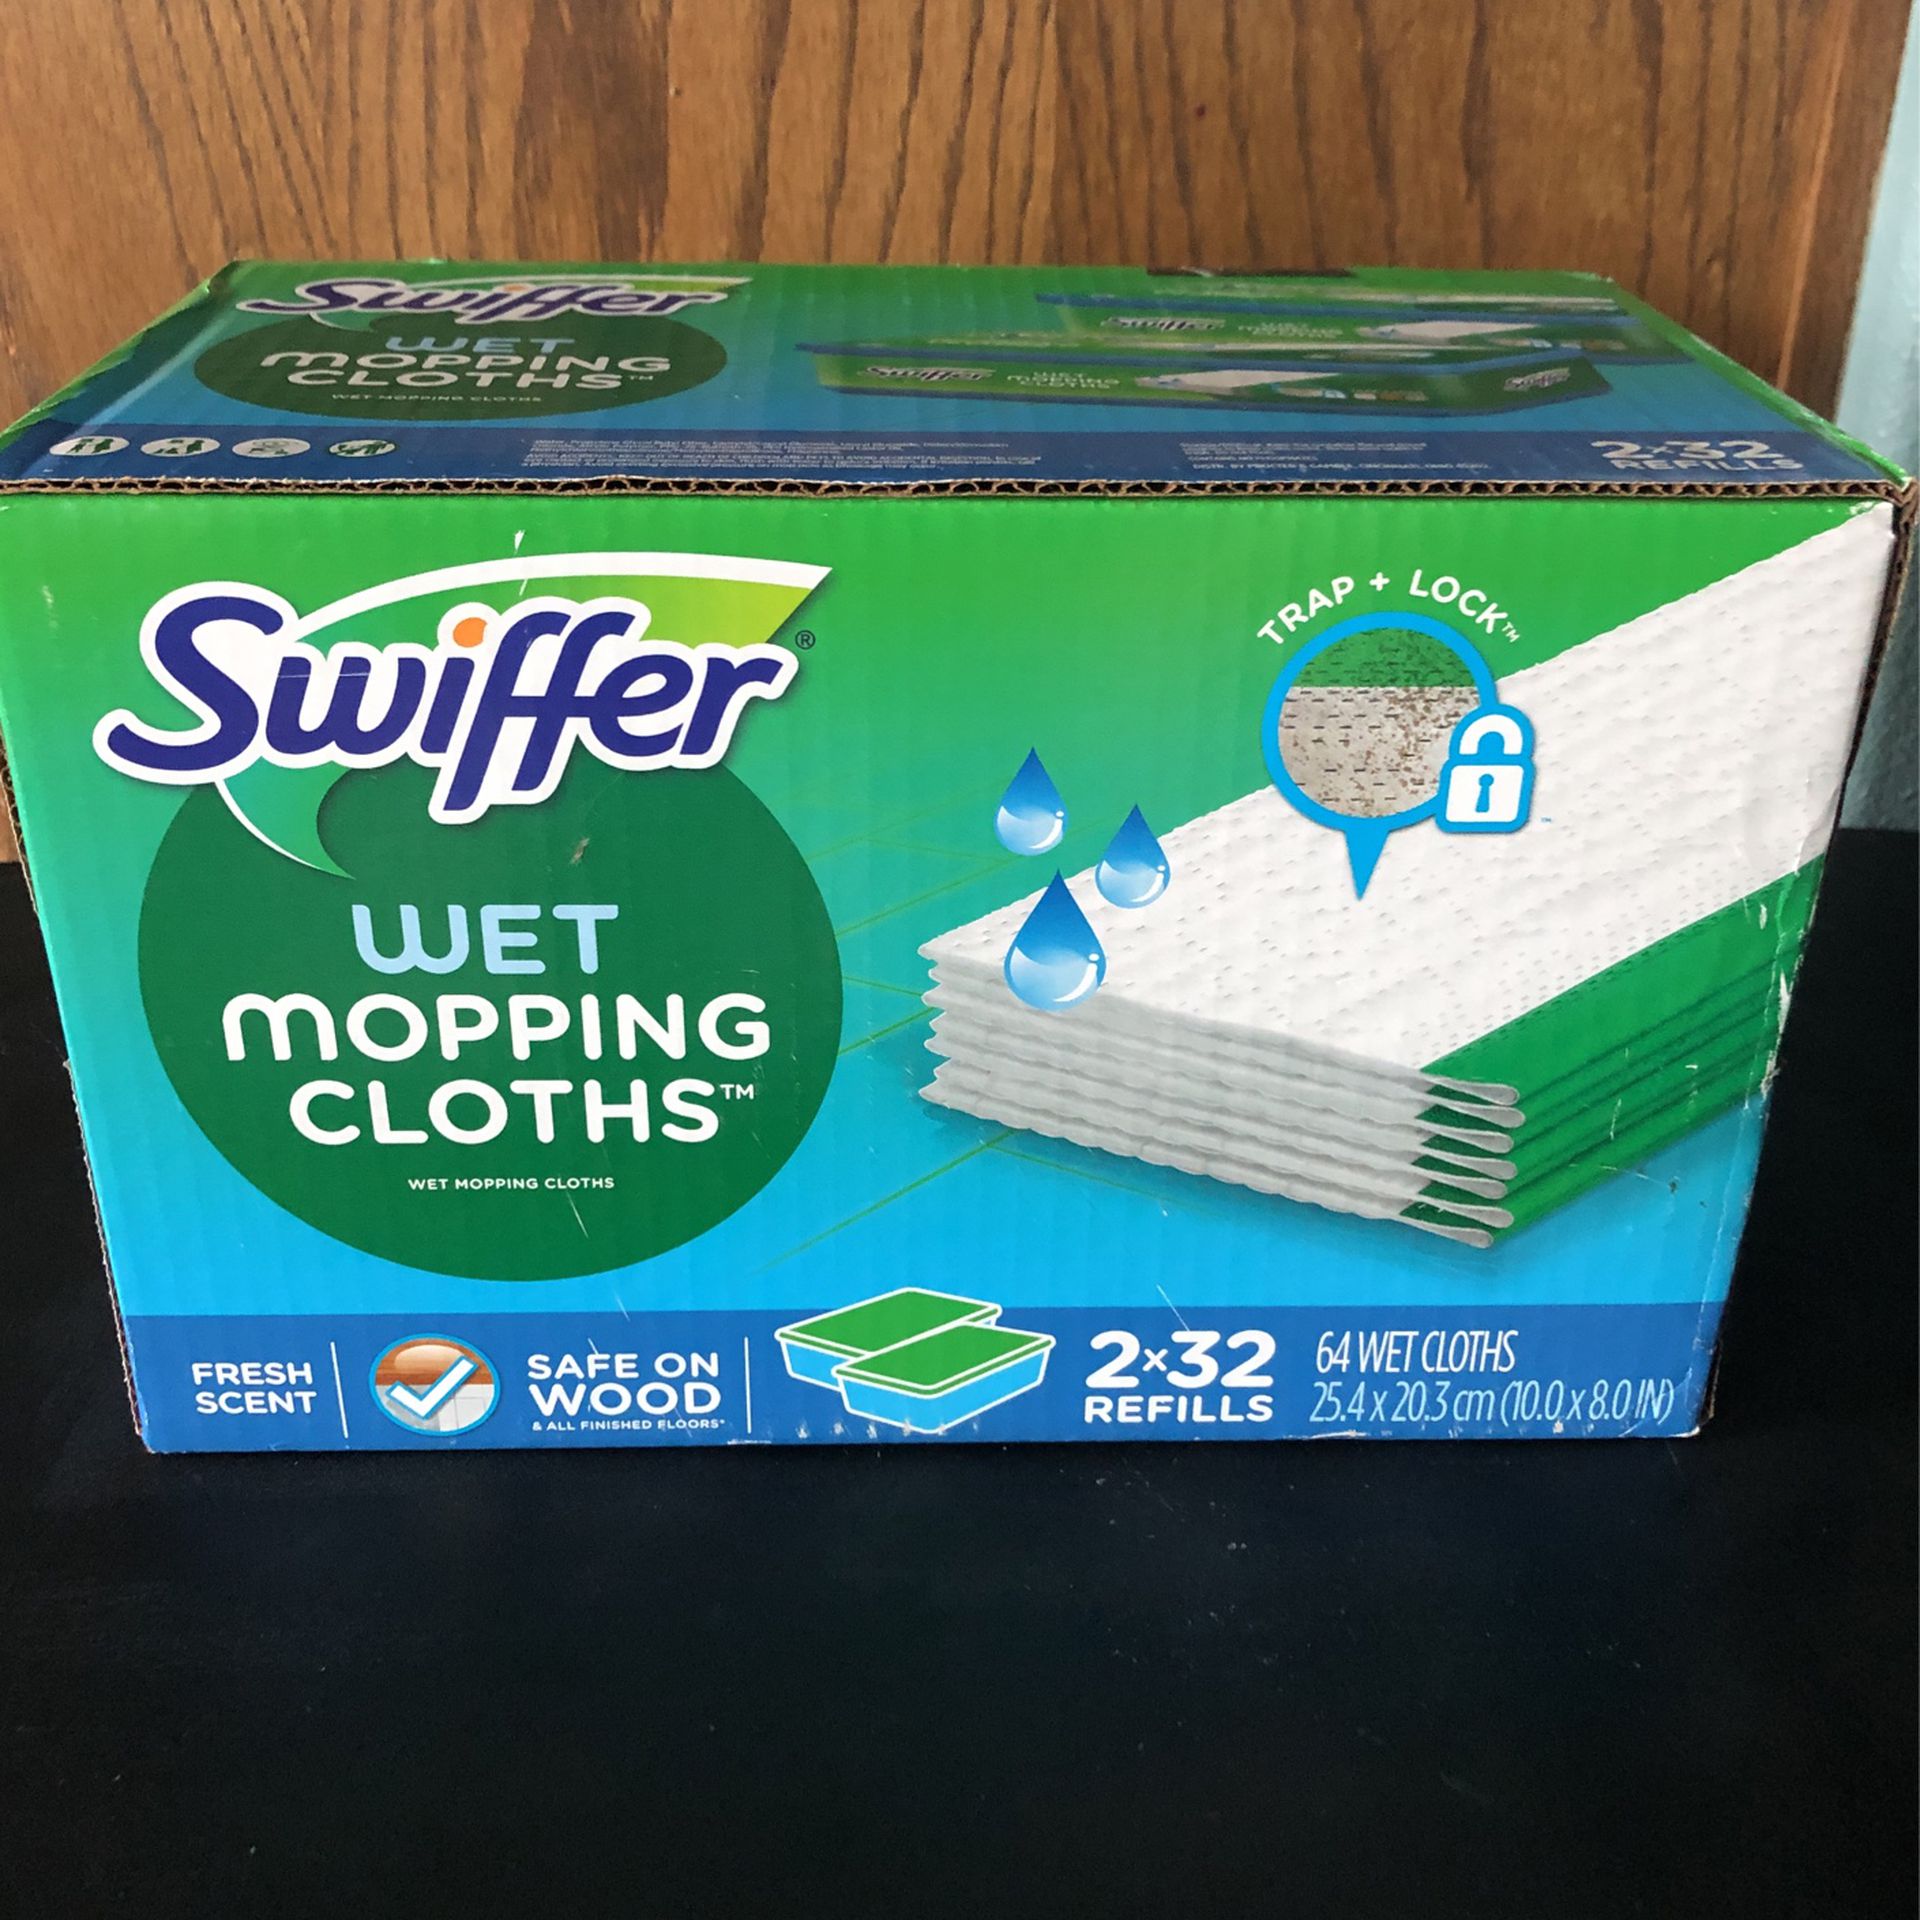 Swiffer Mopping Cloths - No Shipping